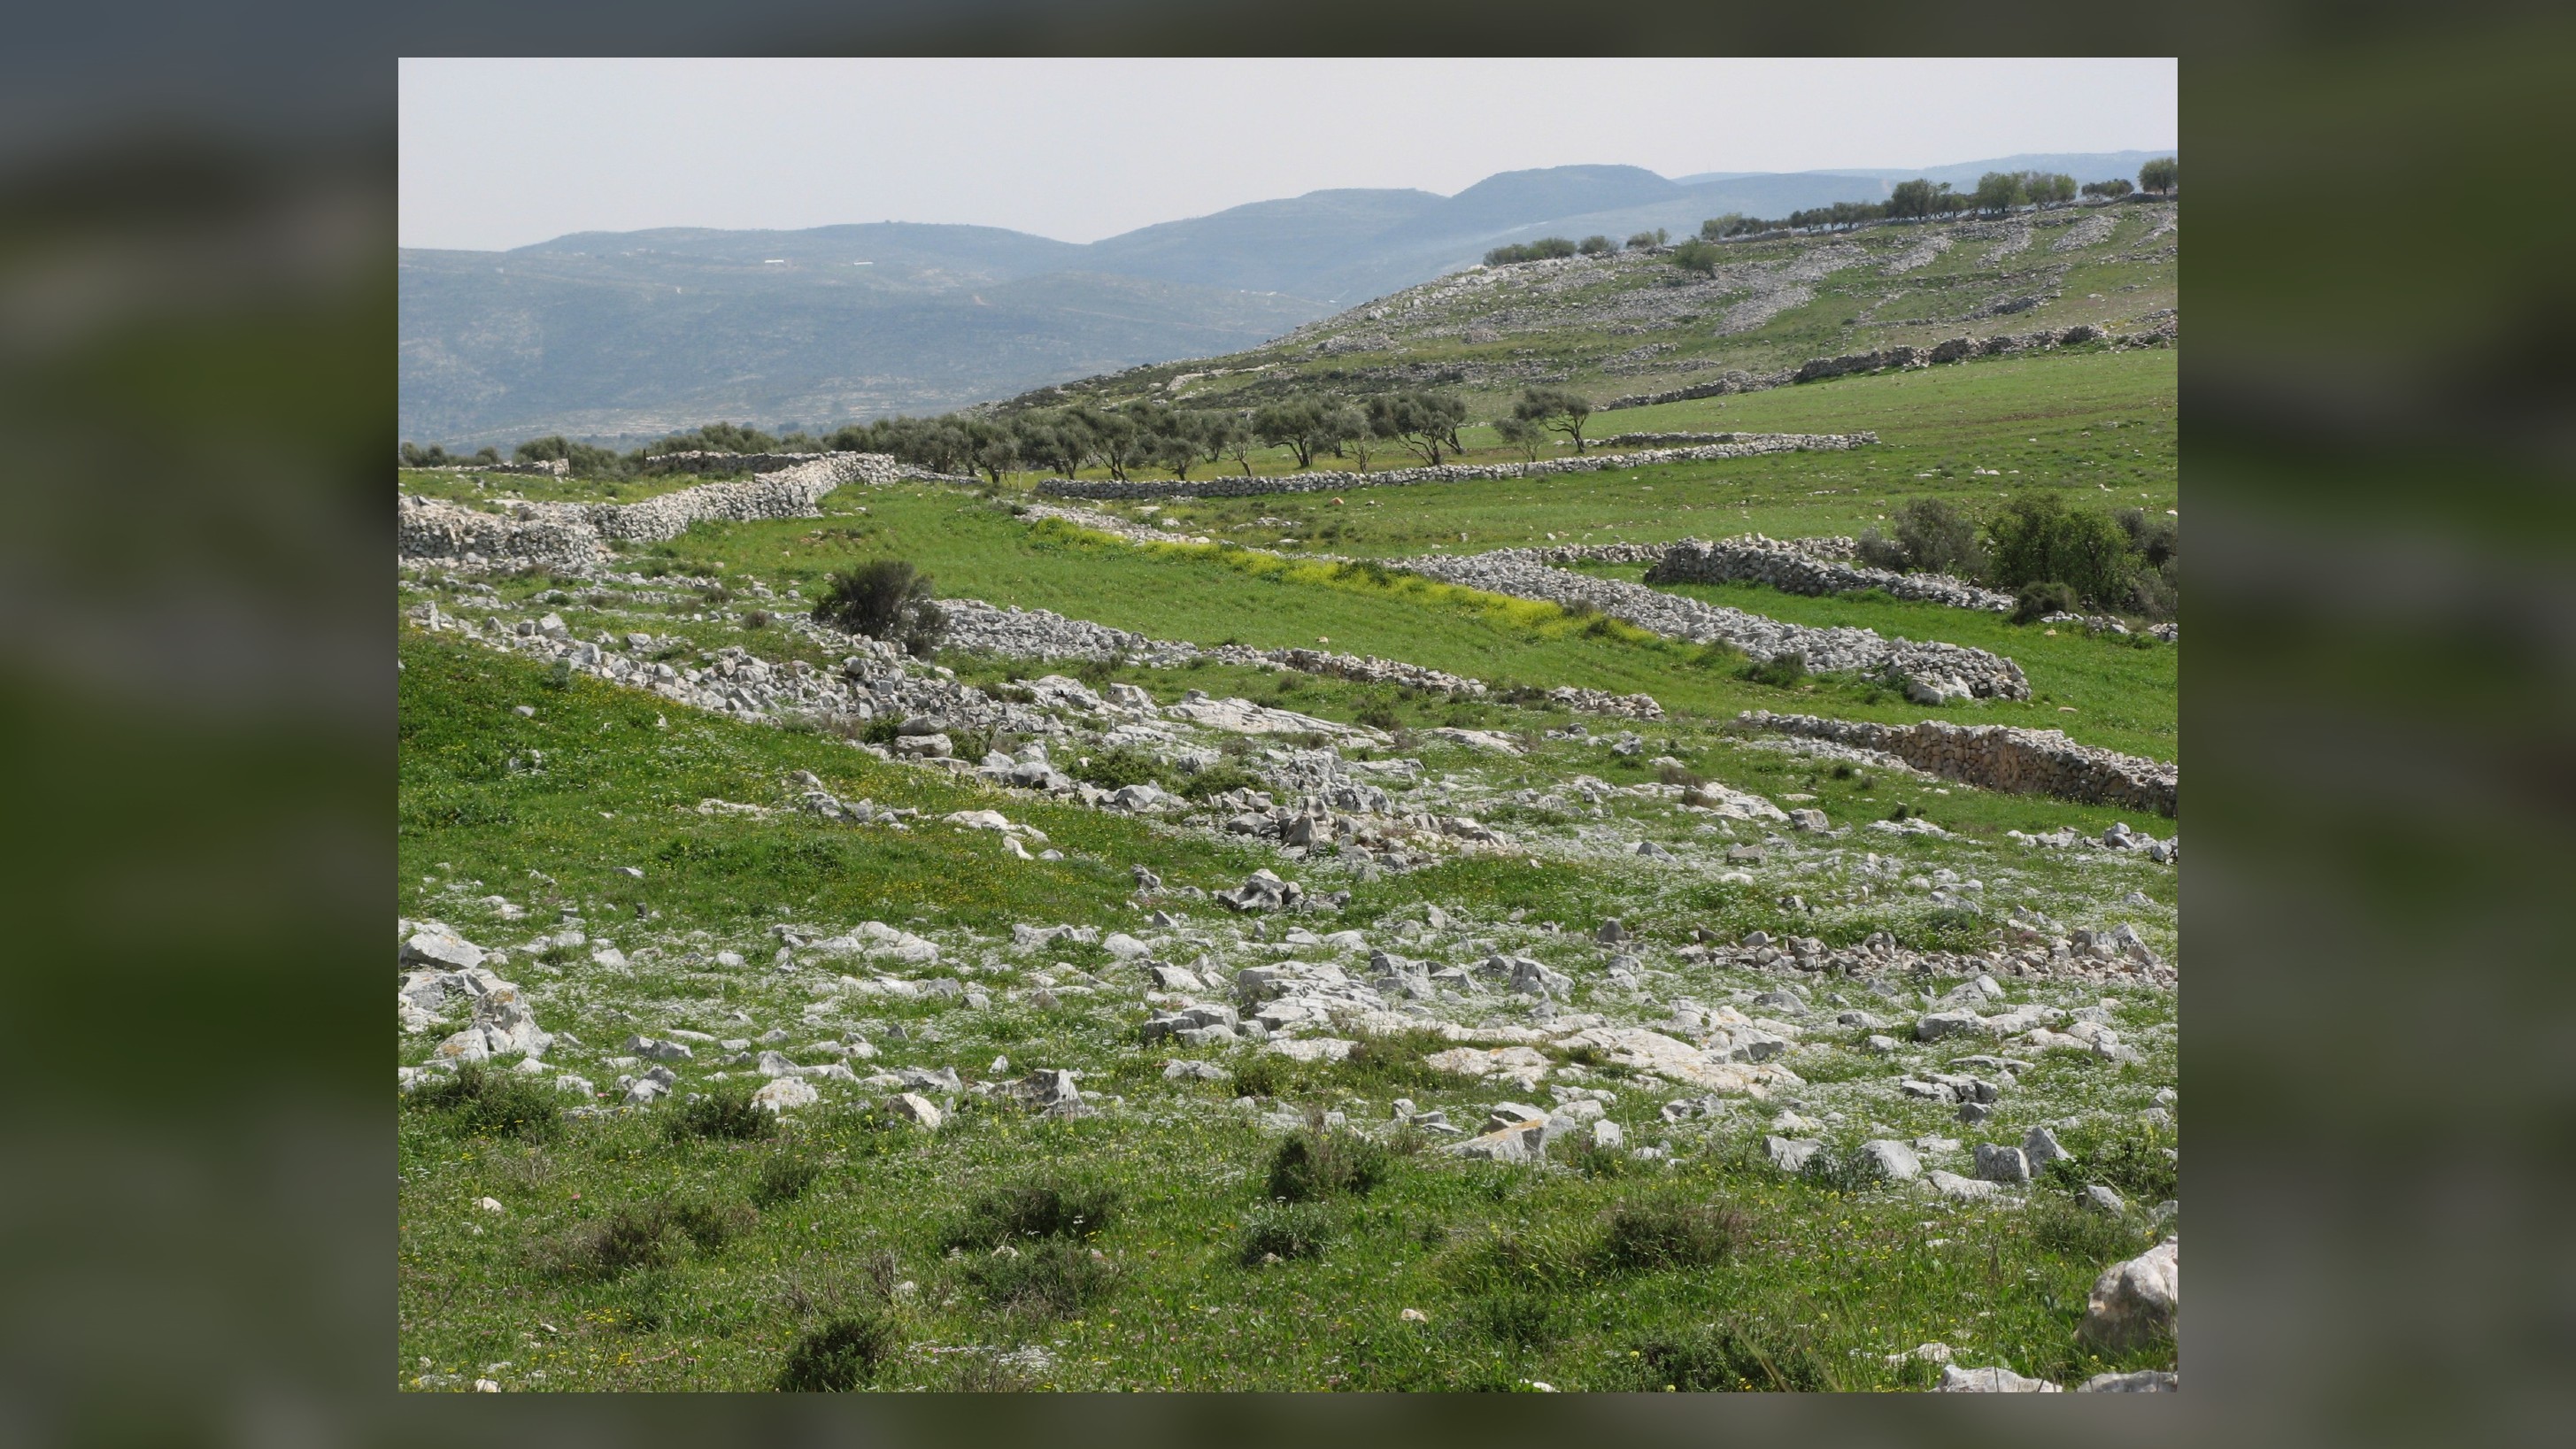 Mount Ebal, just north of the city of Nablus in the West Bank, is said in a biblical passage to be one of the first locations in Canaan seen by the ancient Israelites.